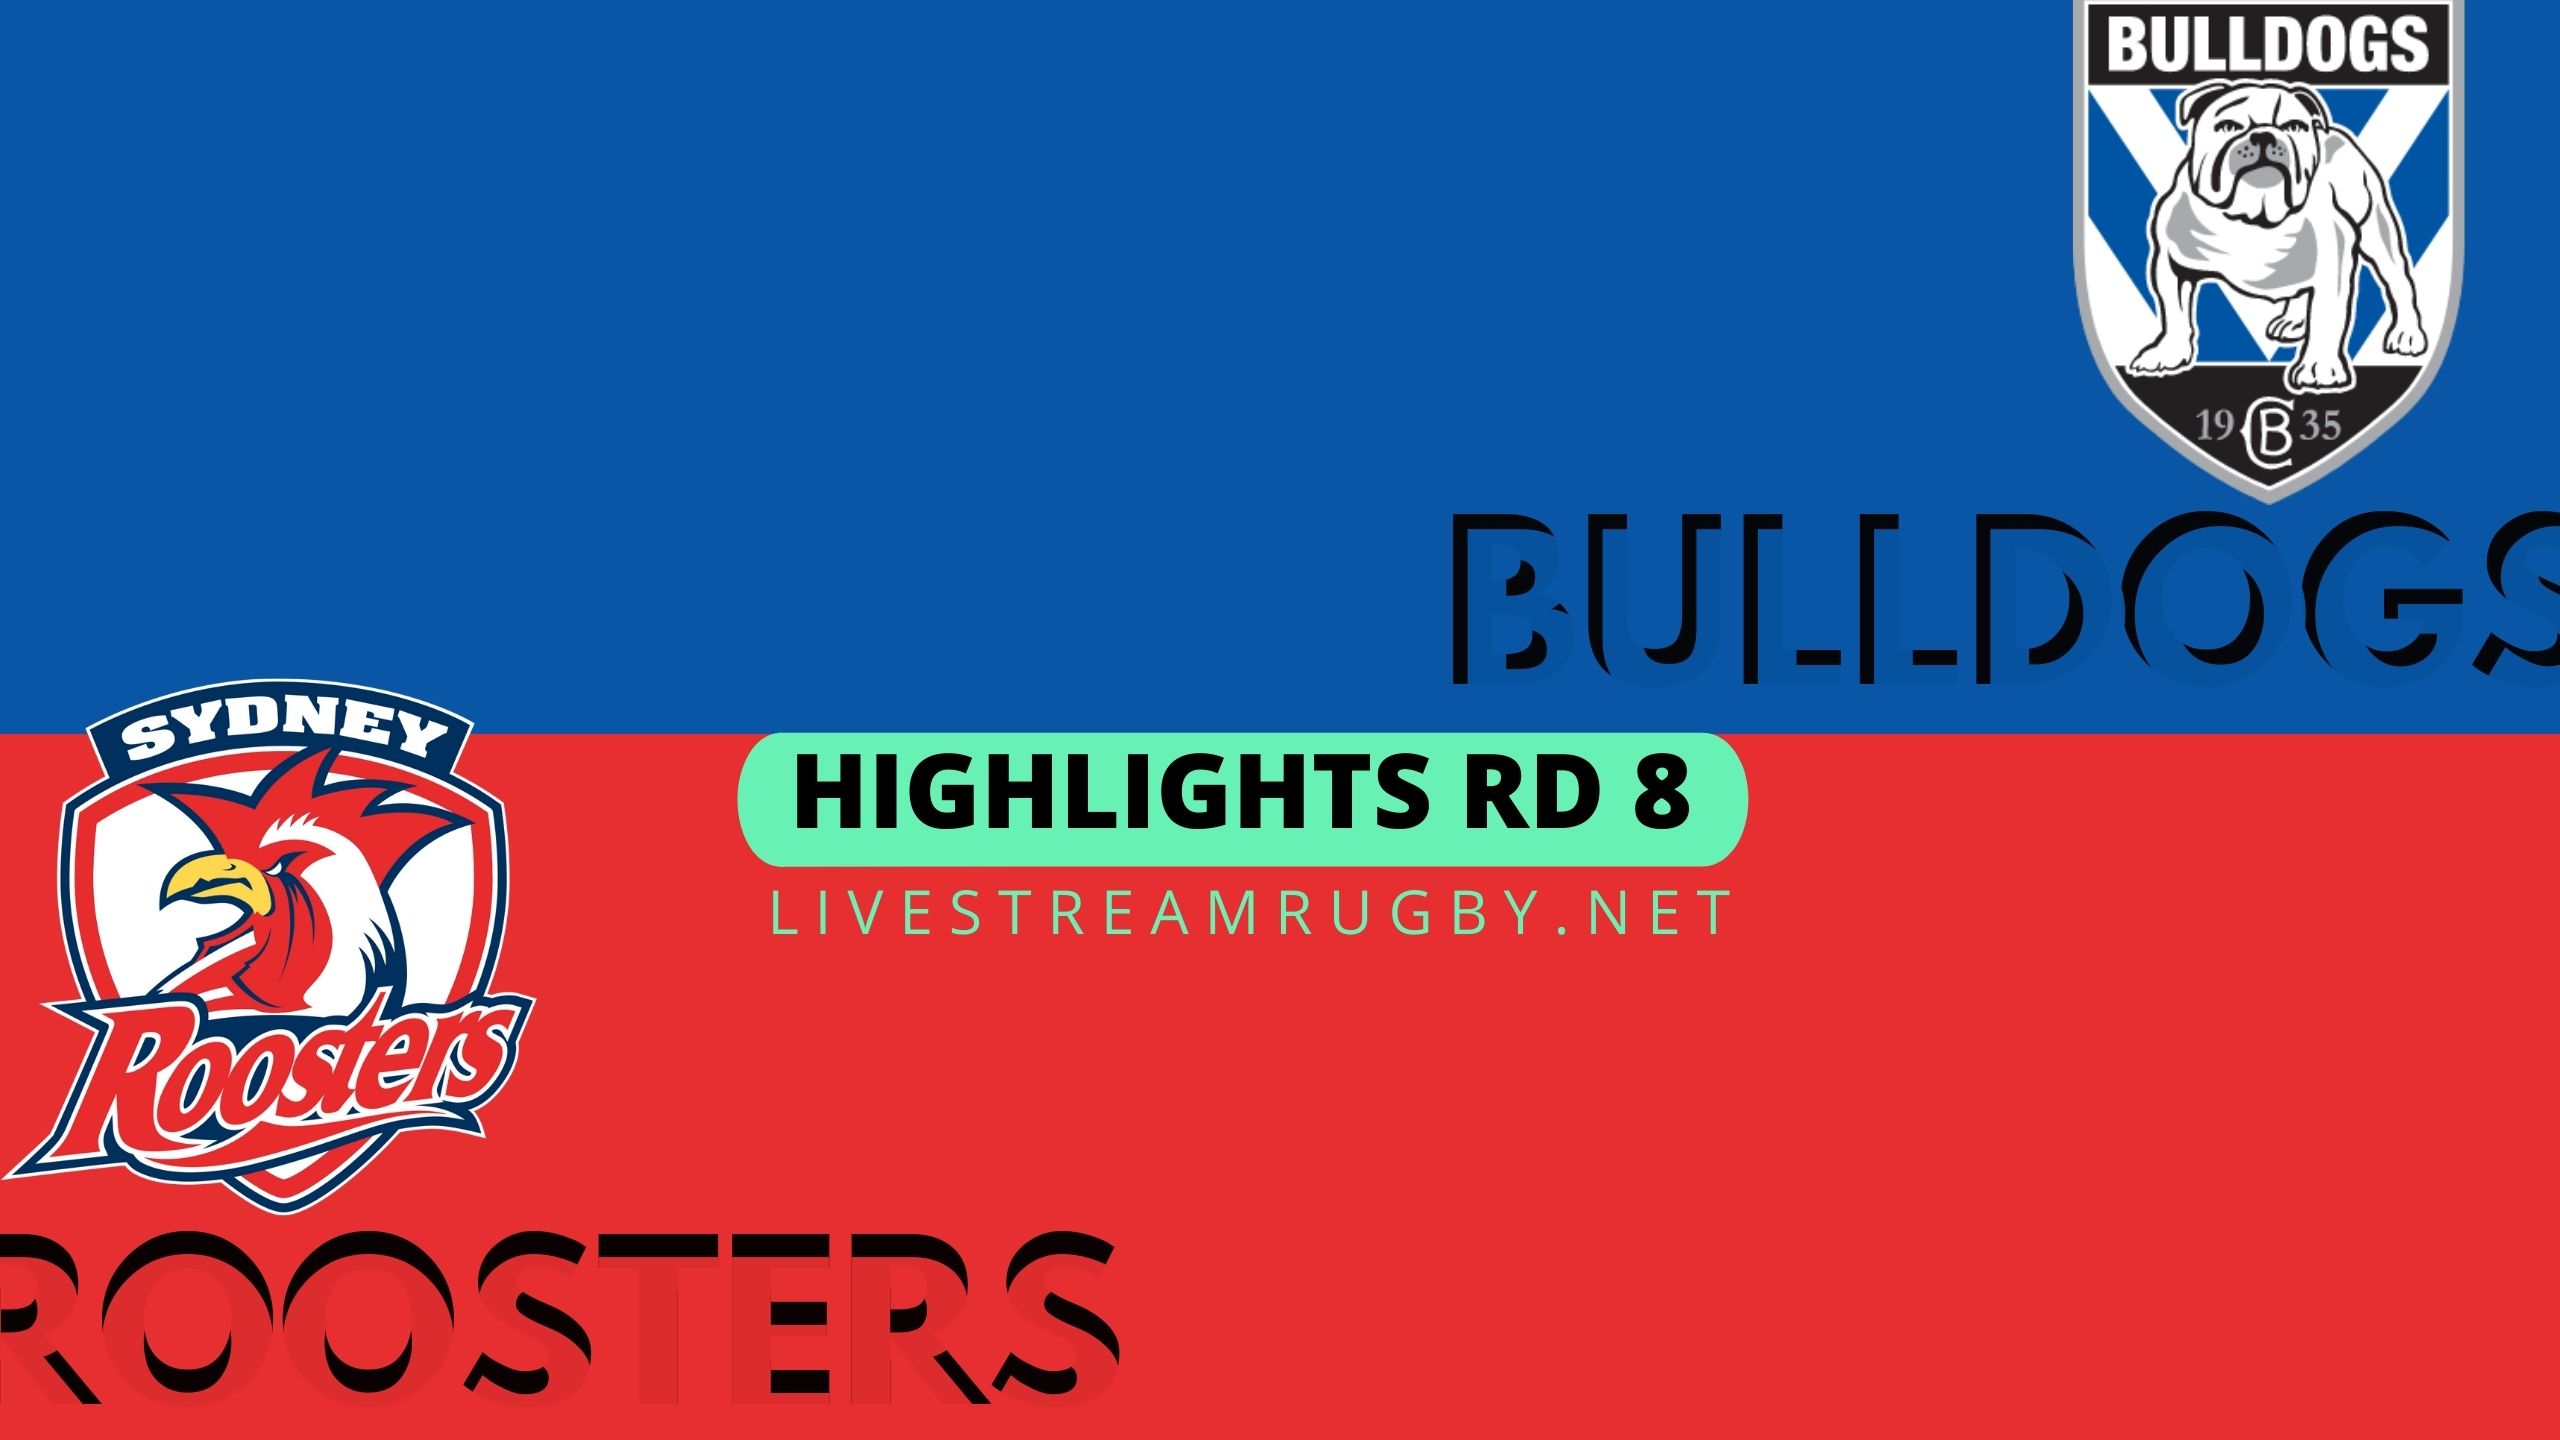 Bulldogs Vs Roosters Highlights 2022 Rd 8 NRL Rugby